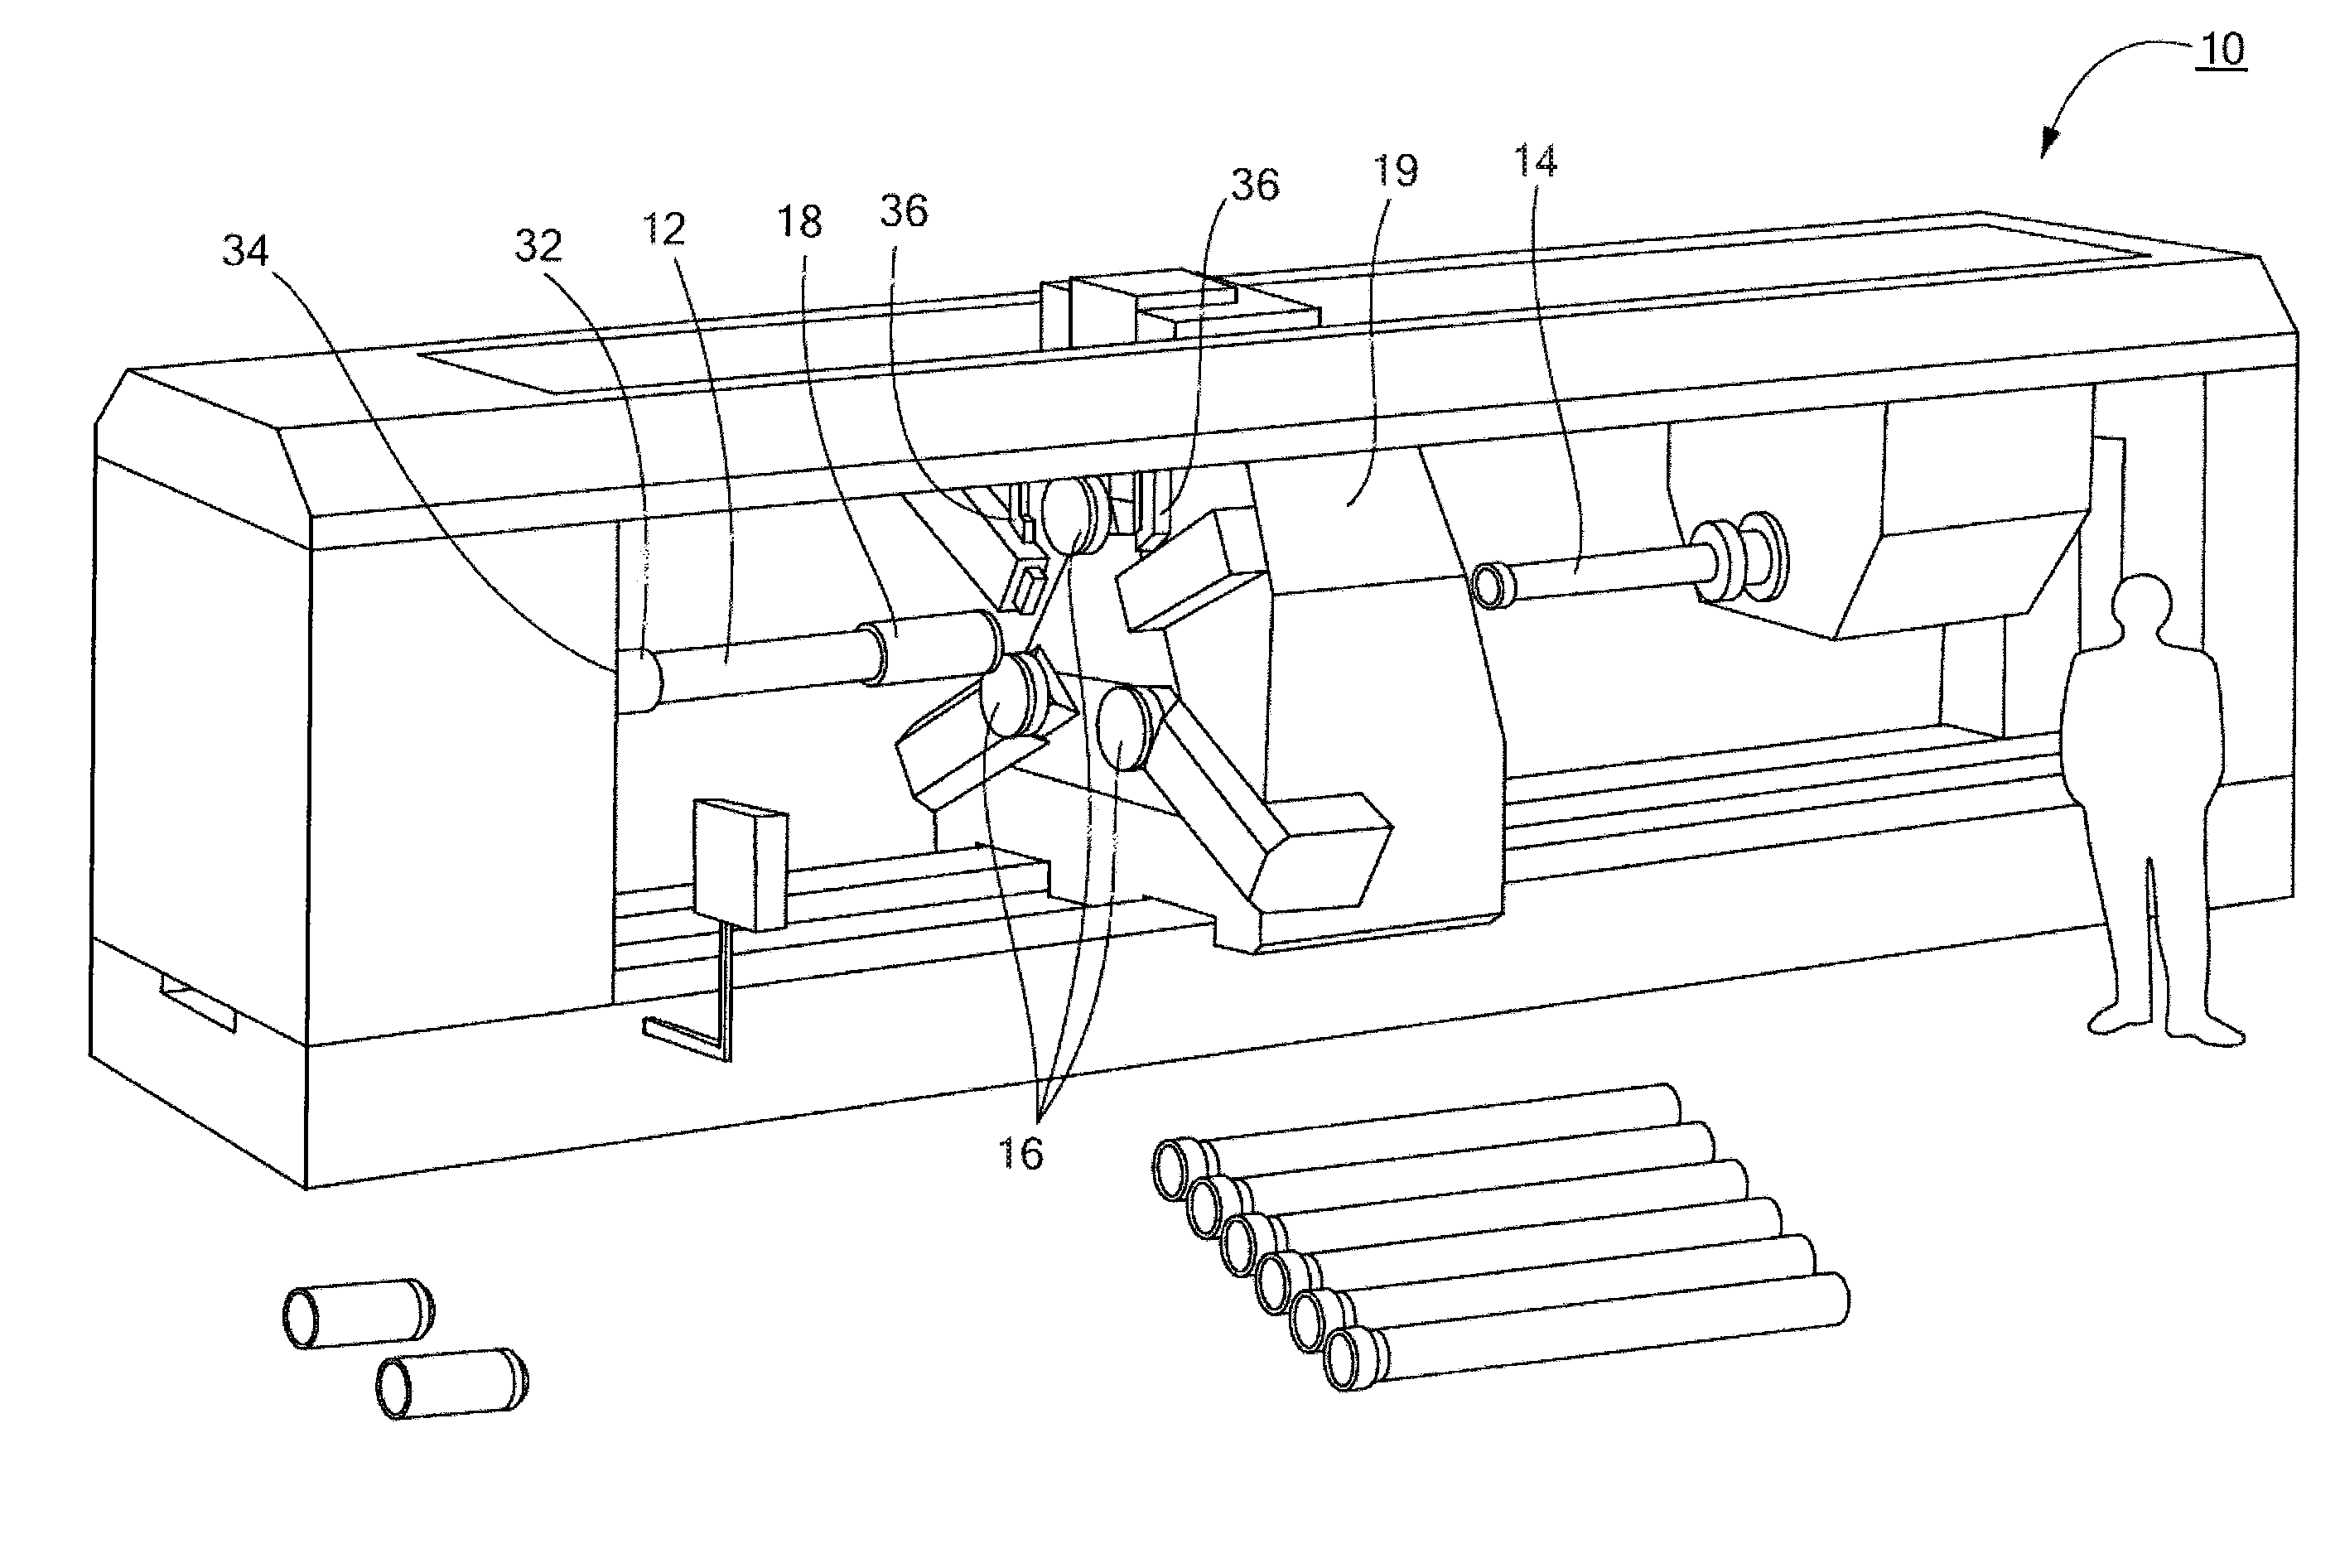 Method of Producing Cold-Worked Centrifugal Cast Tubular Products